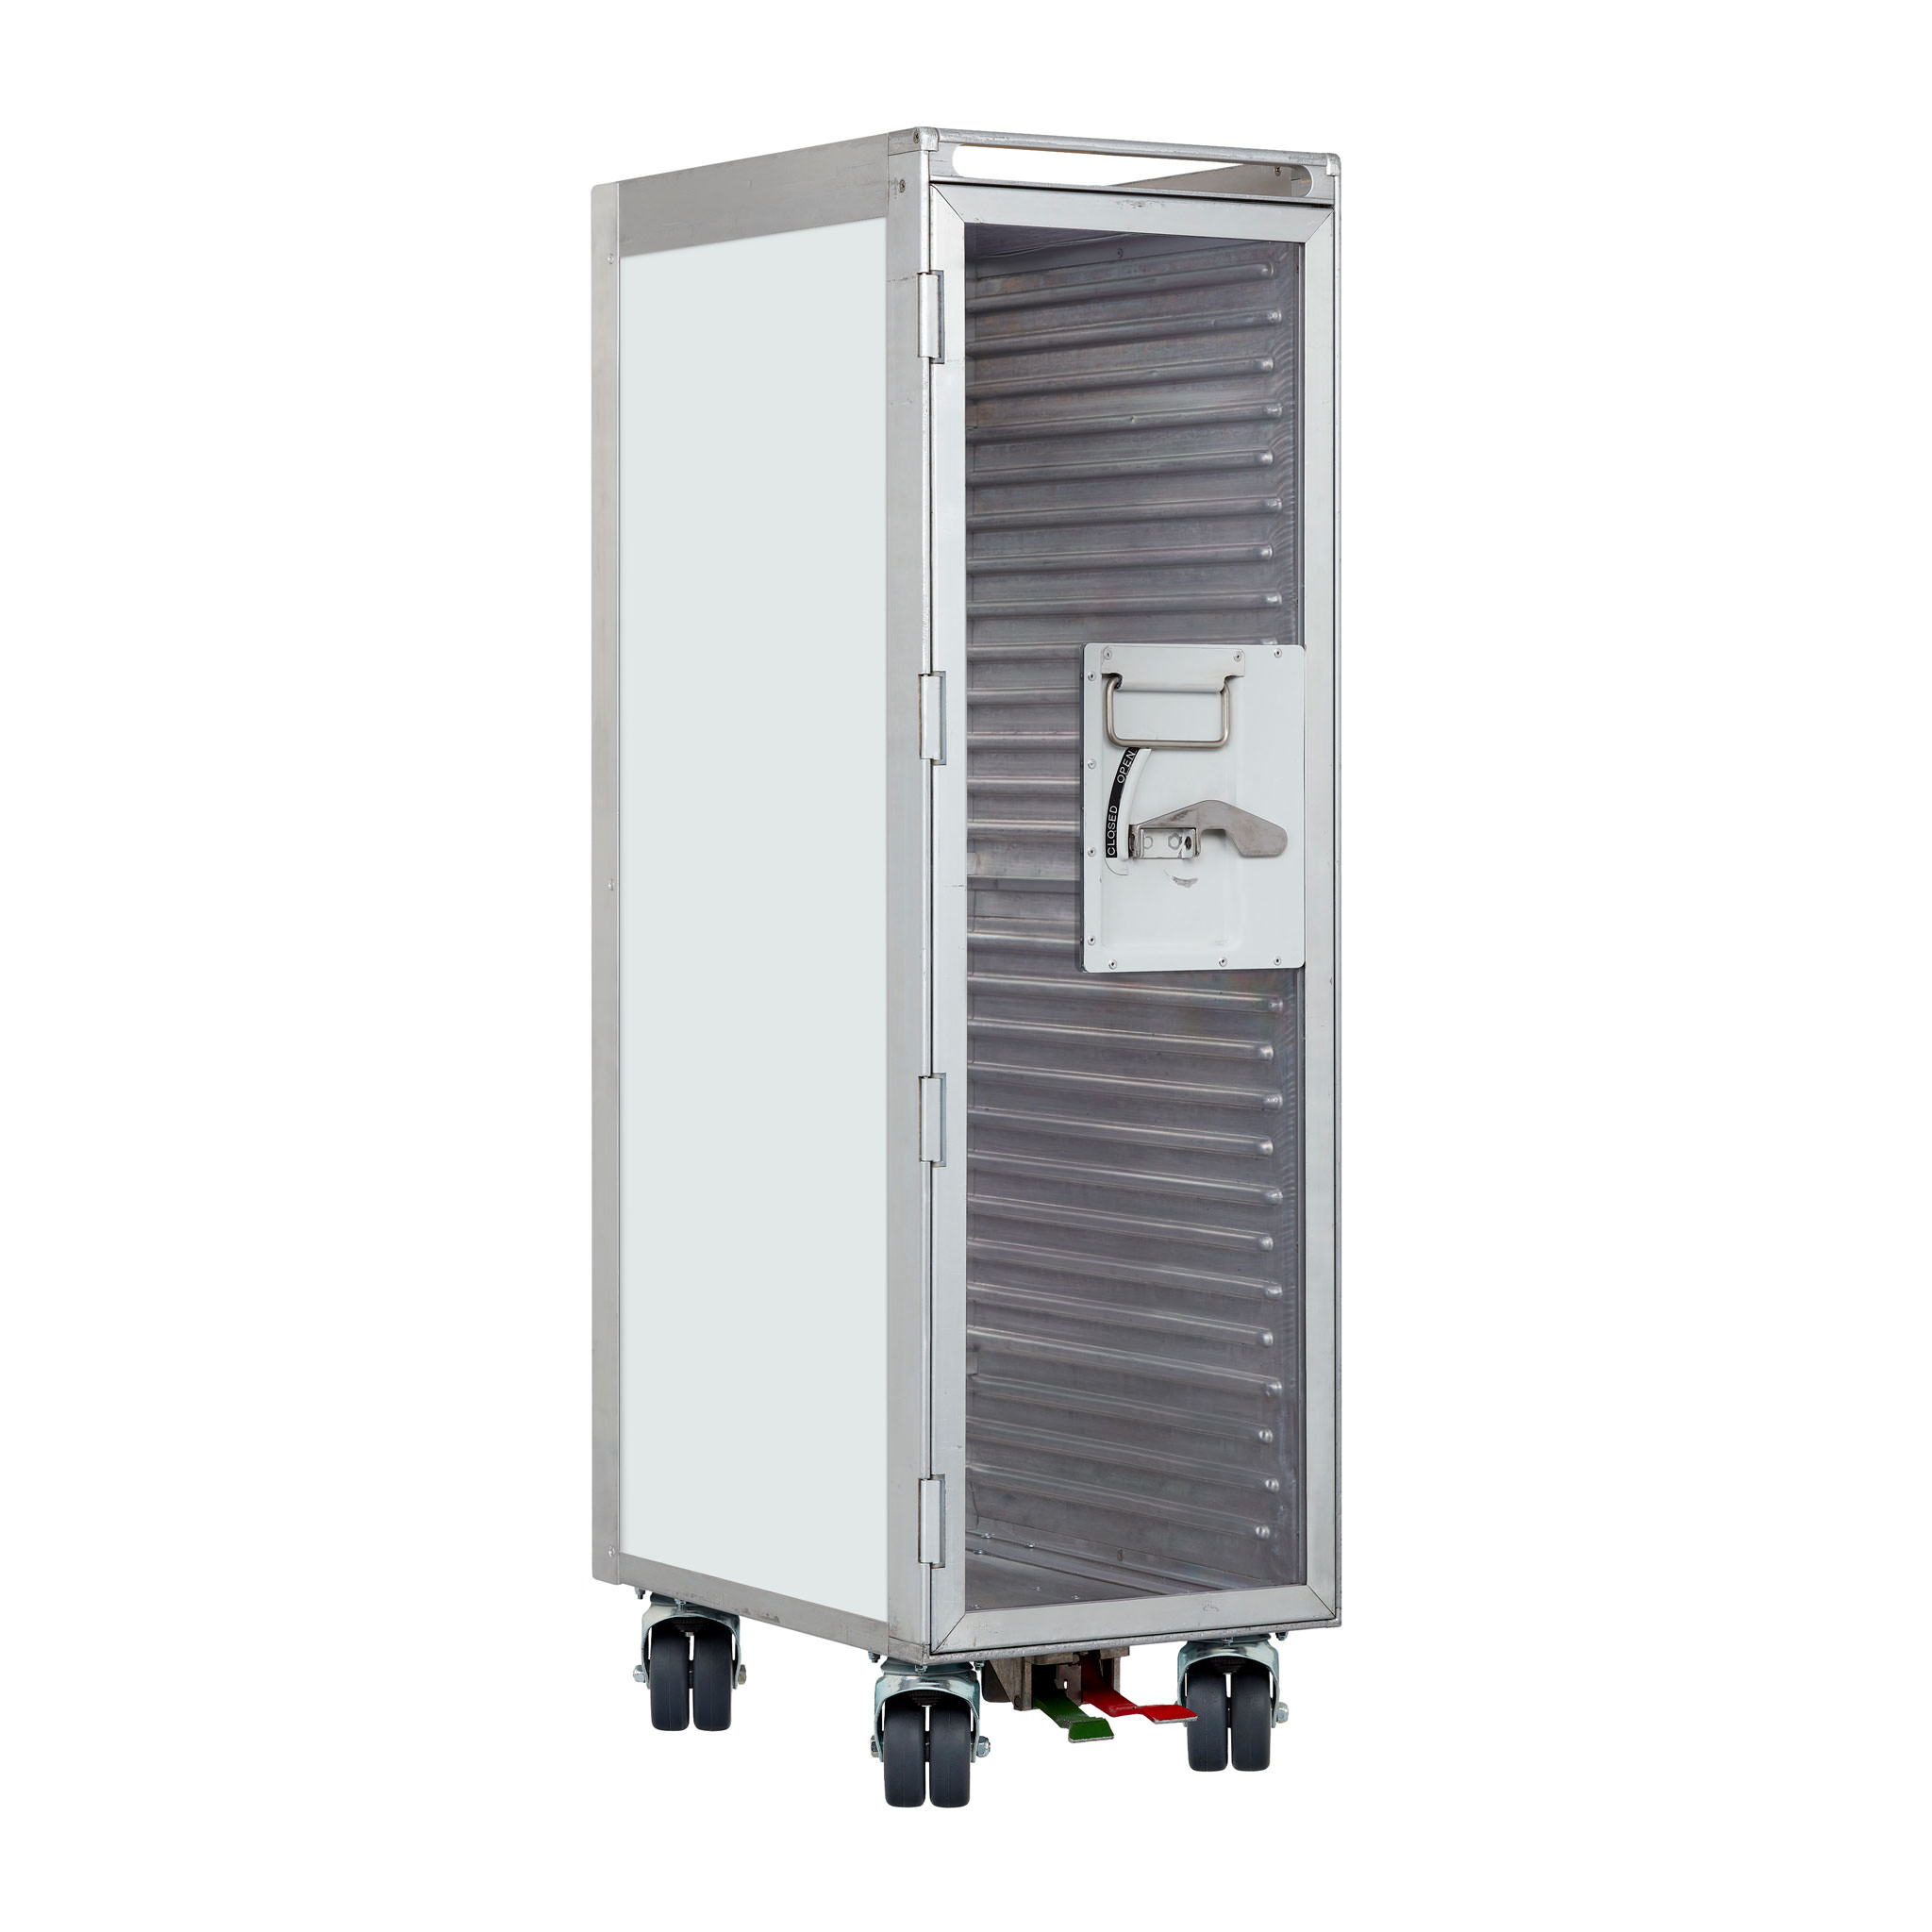 Airline Cart Single-Color Refurbished Airline Grey RAL 7035 with Glass Door and new Castors